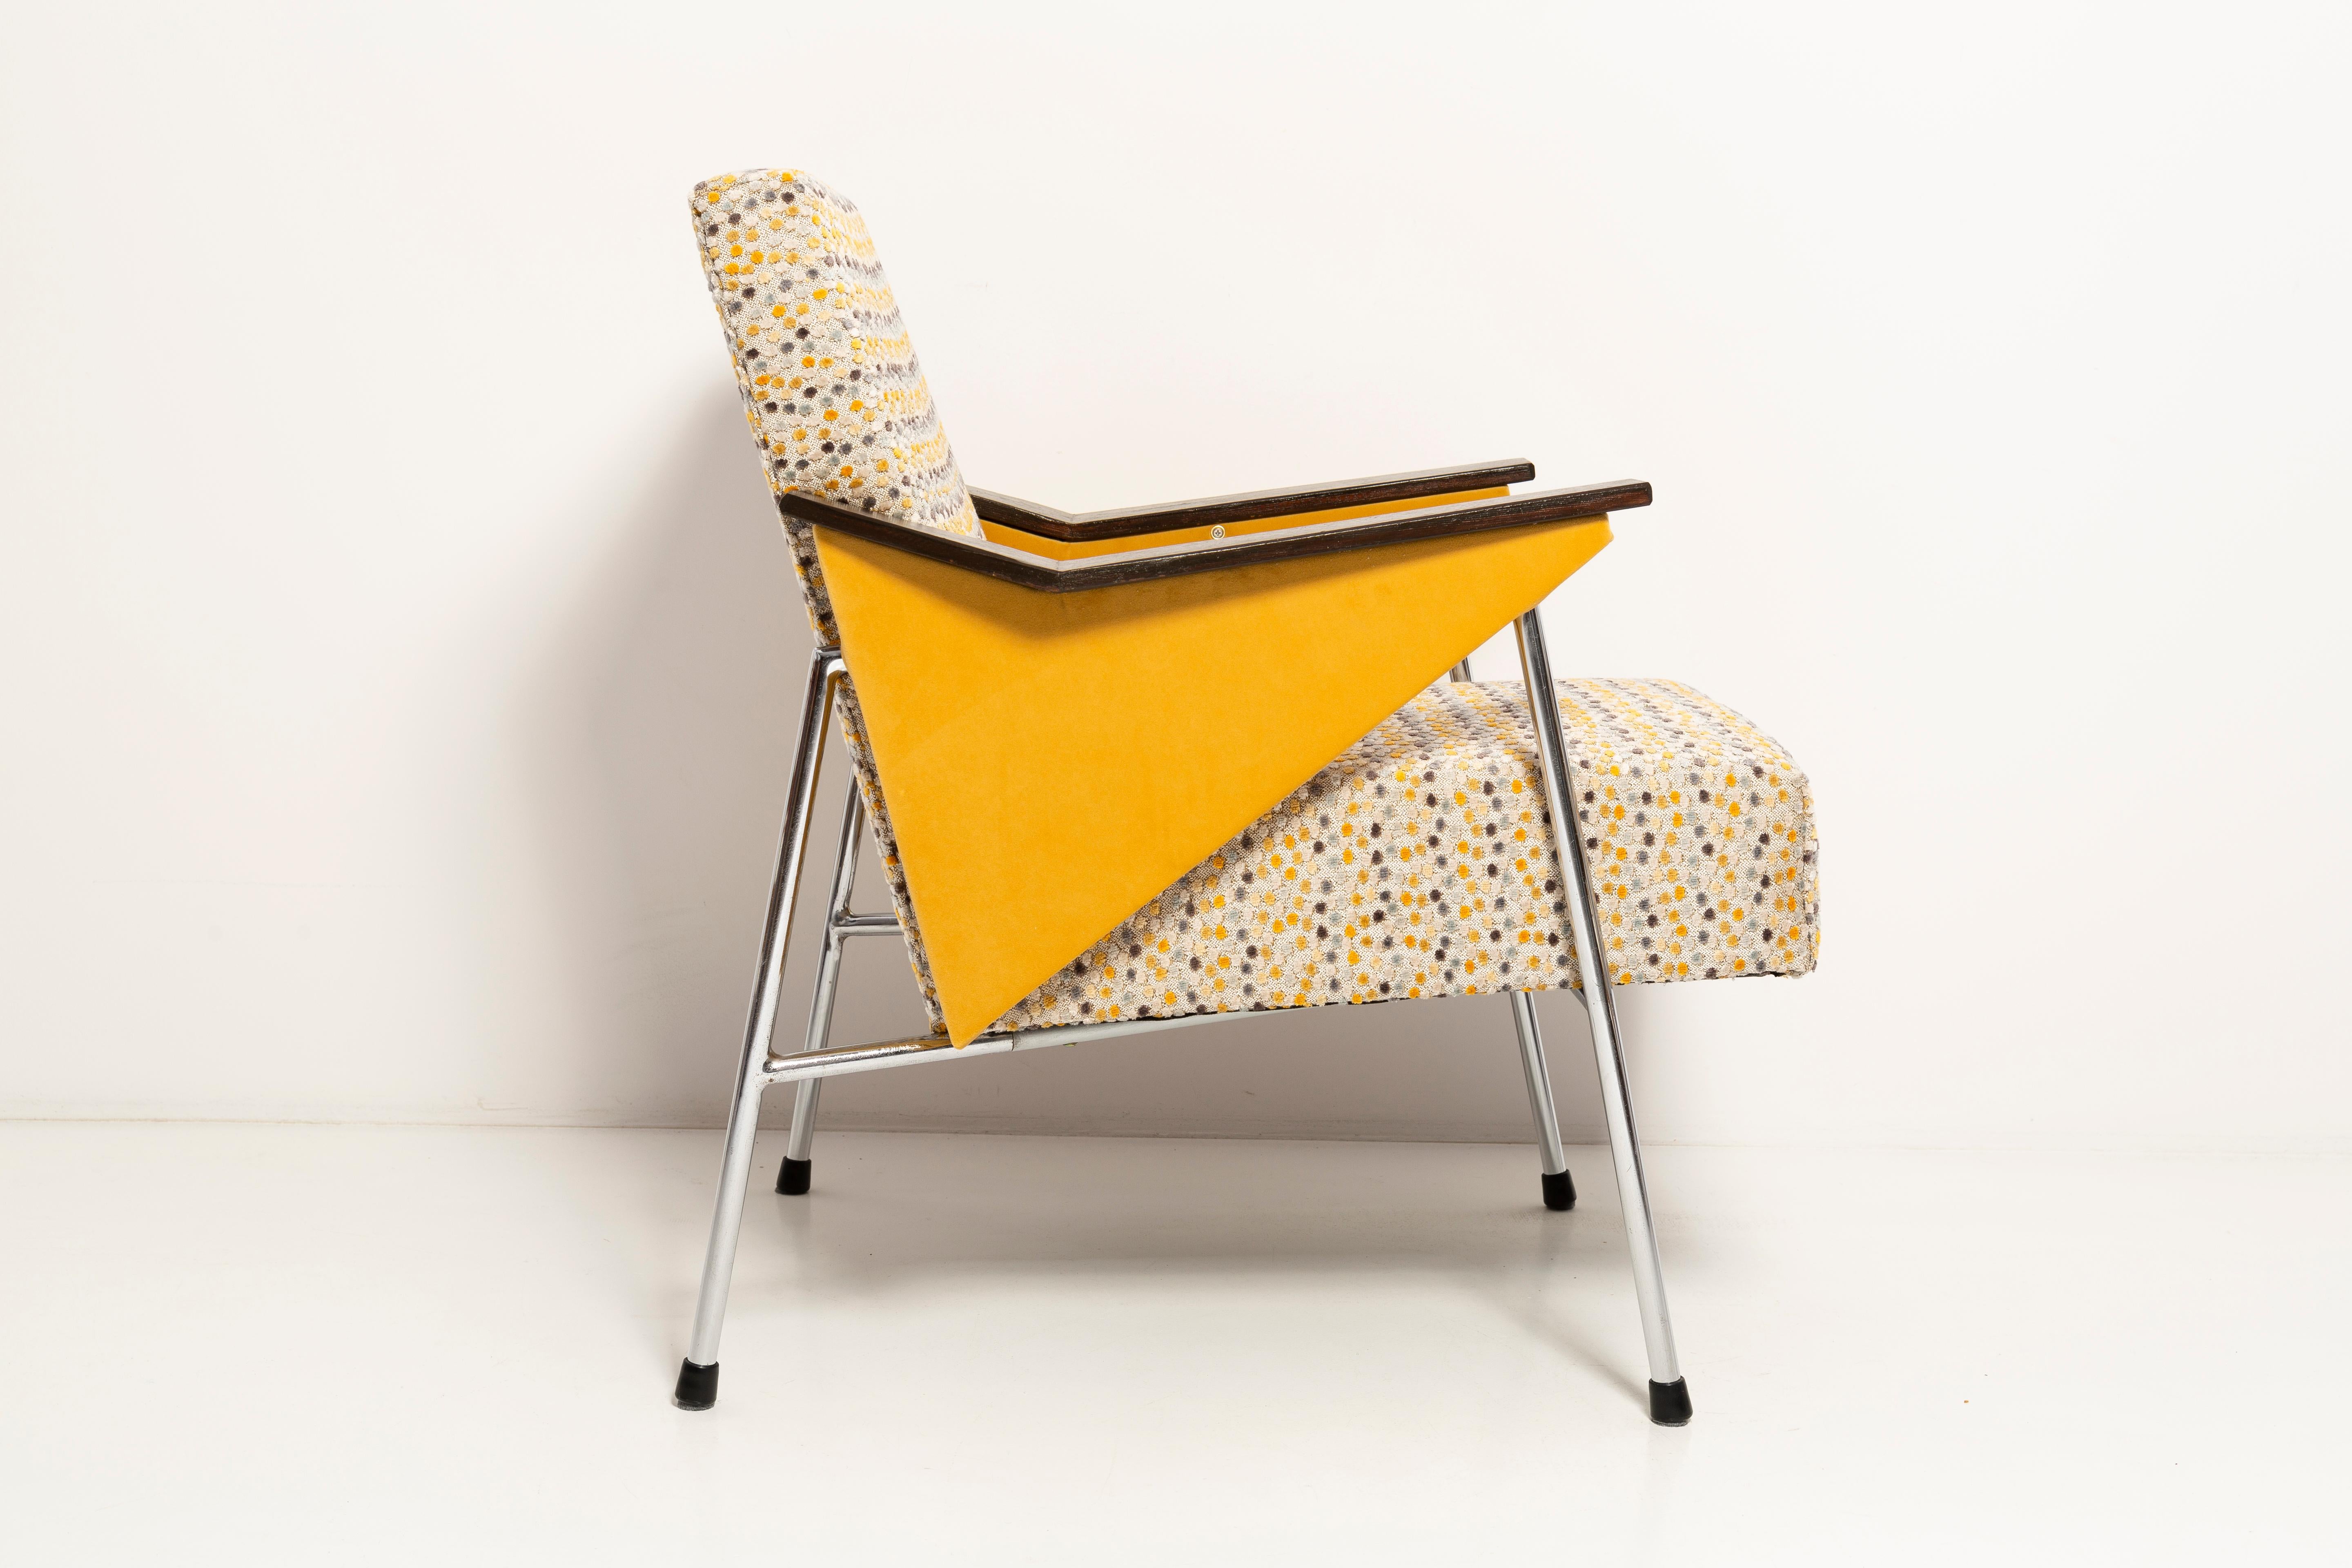 Hand-Crafted Mid Century Bat Armchair, Yellow Dots, Chrome, Bauhaus Style, Poland, 1970s For Sale